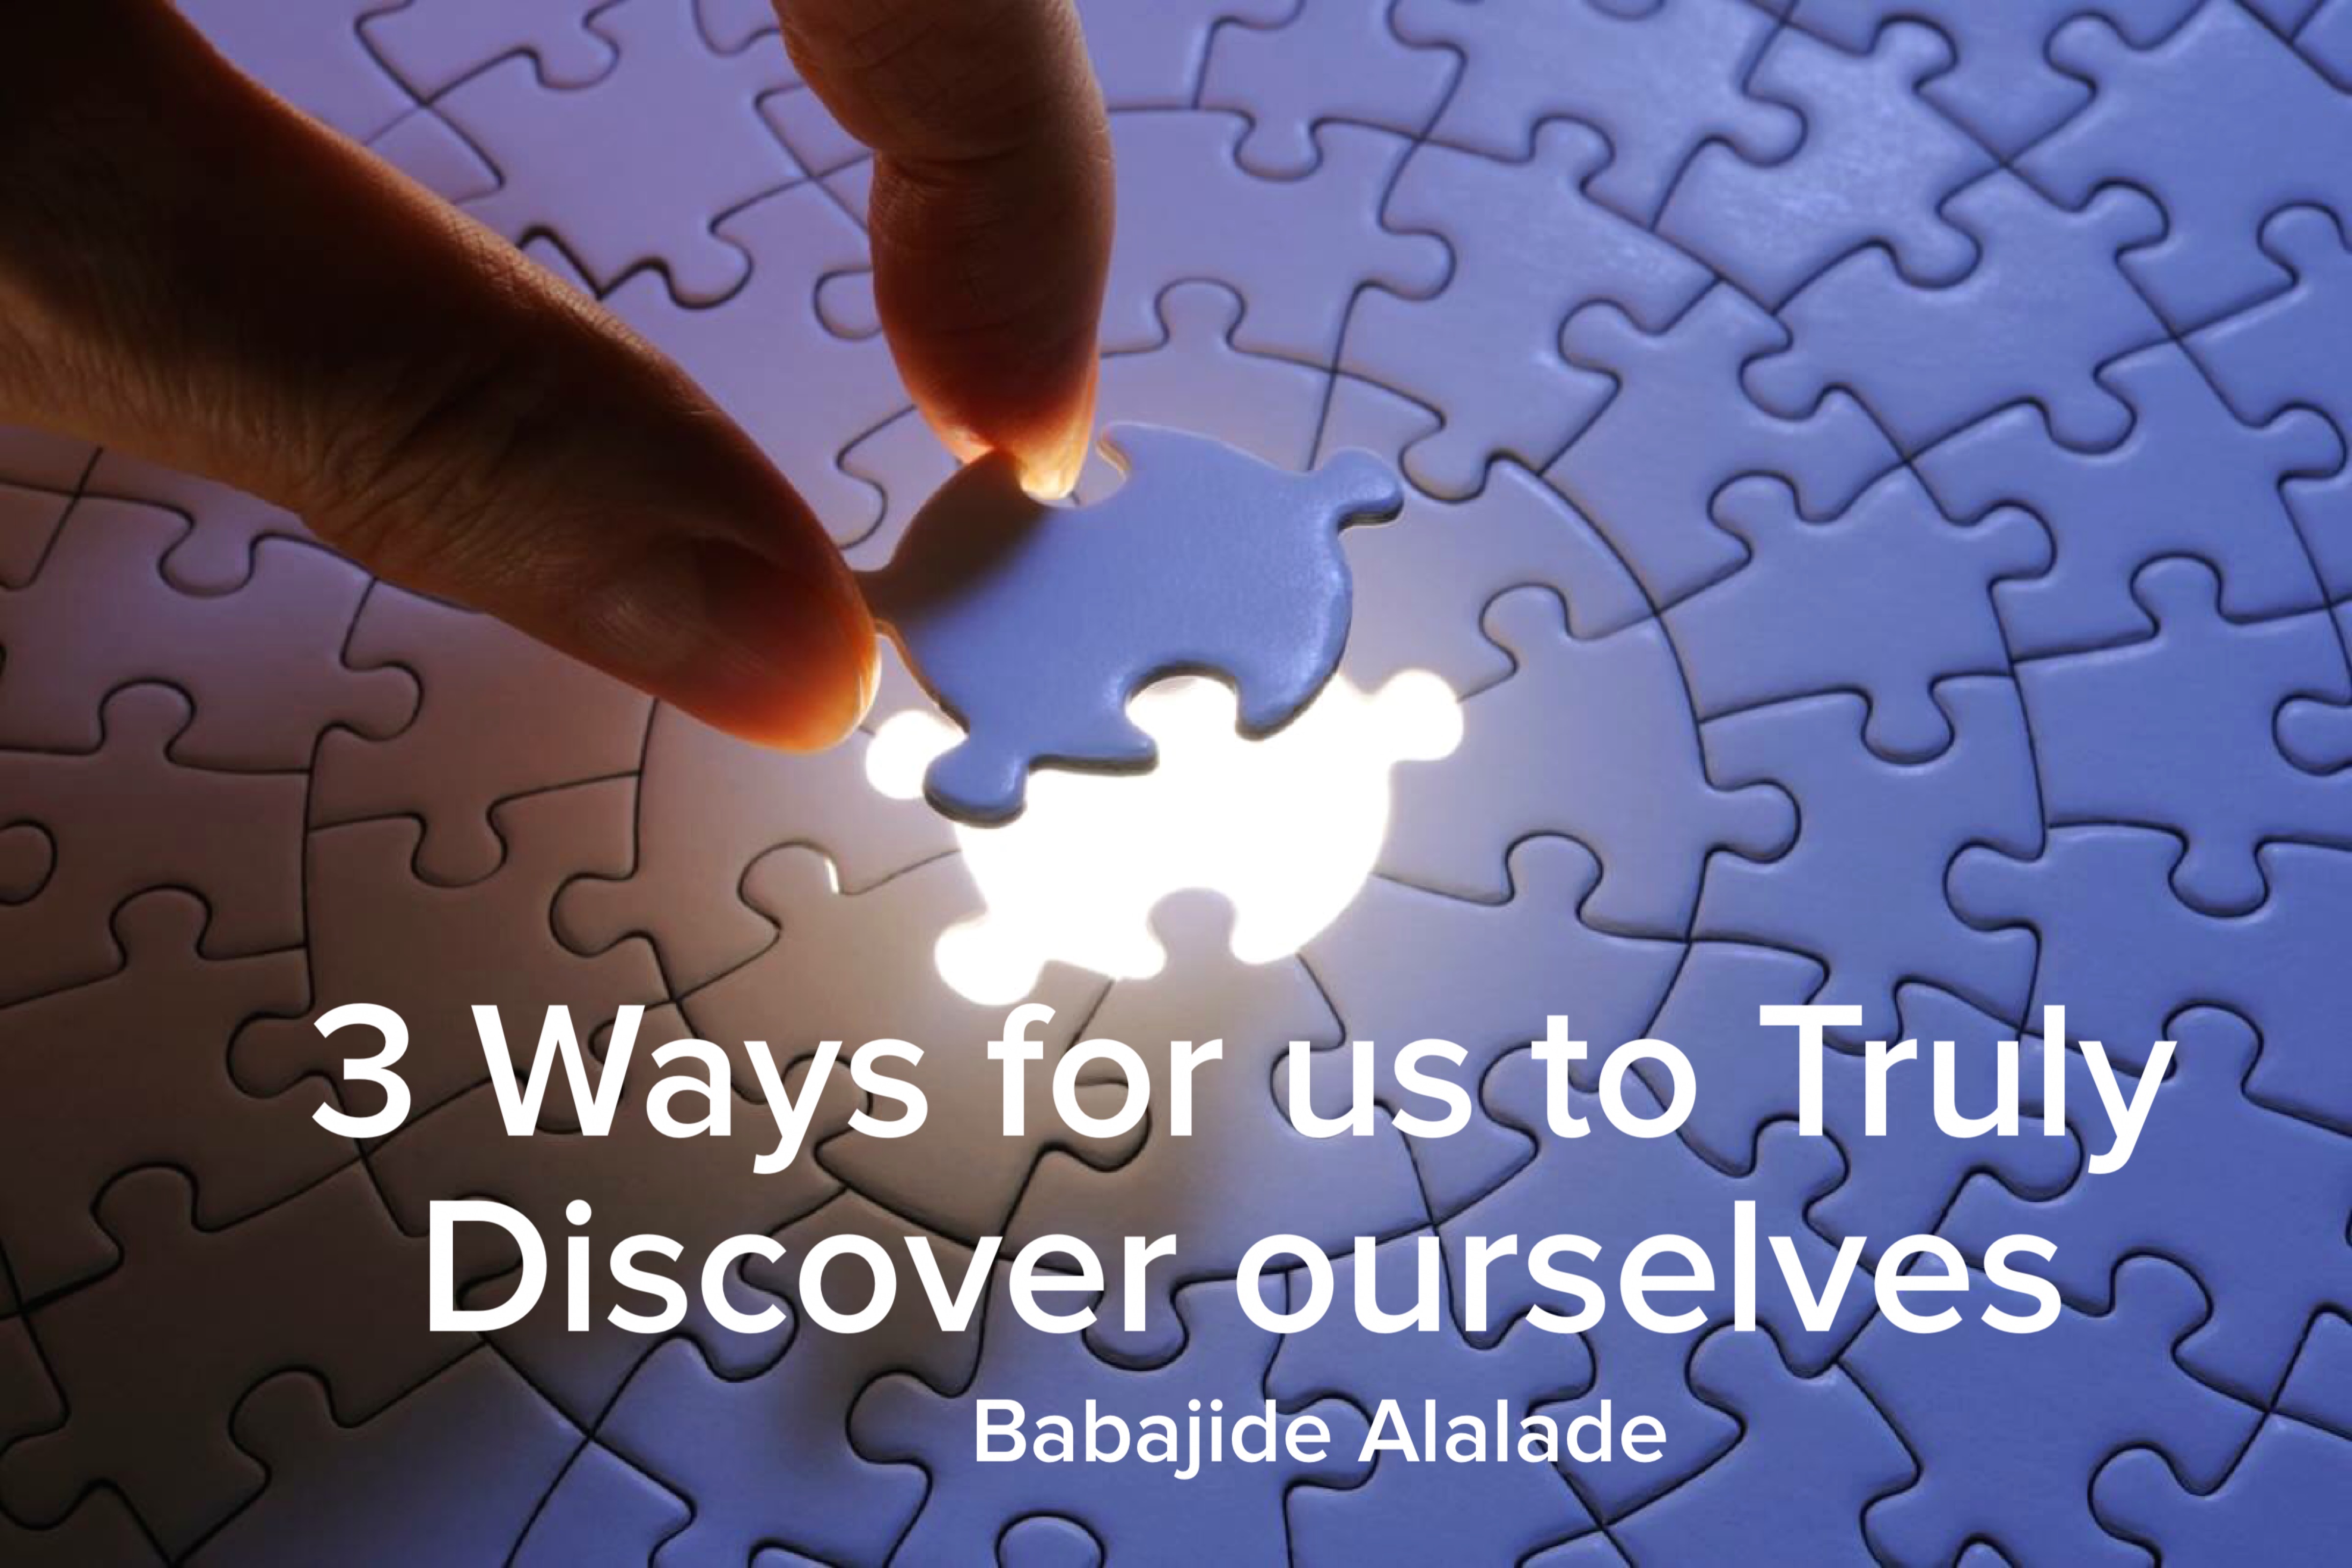 3 Ways to Discover yourself